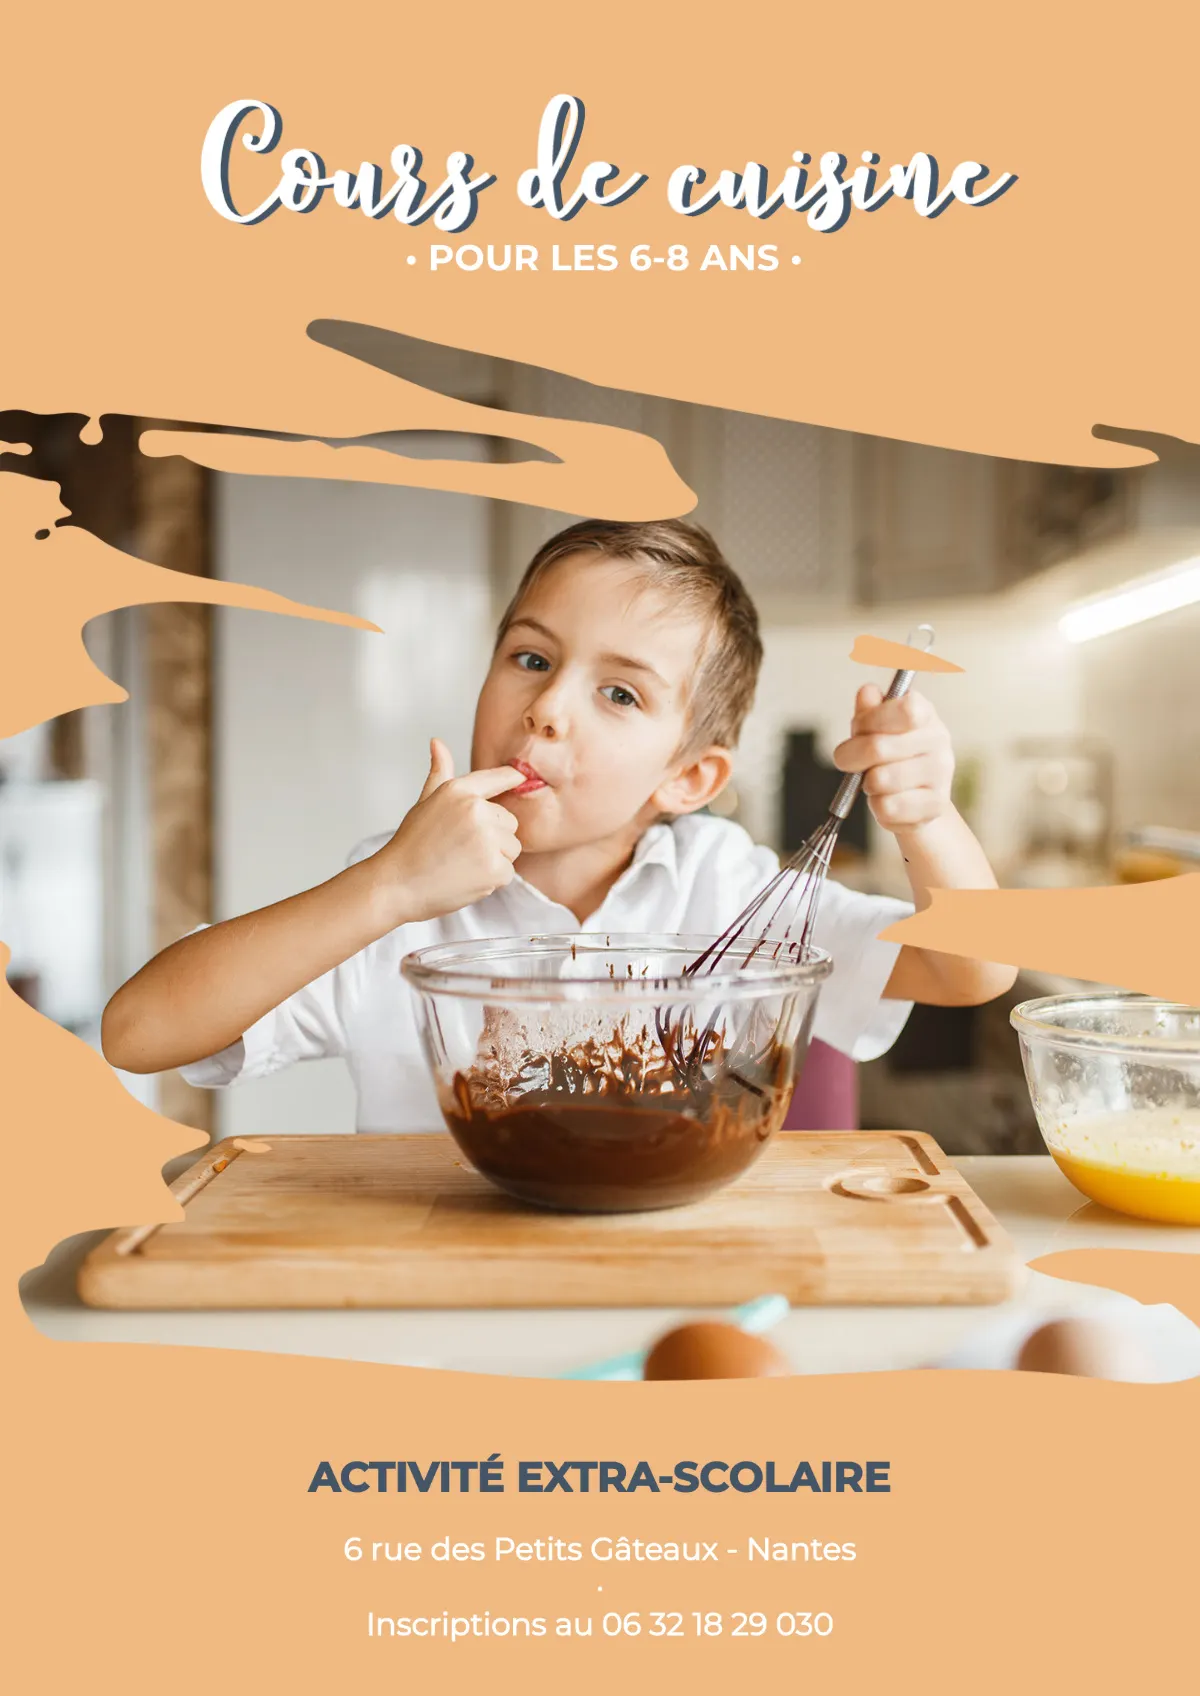 Cooking class for kids after school with orange brush and a child boy with ingredients poster